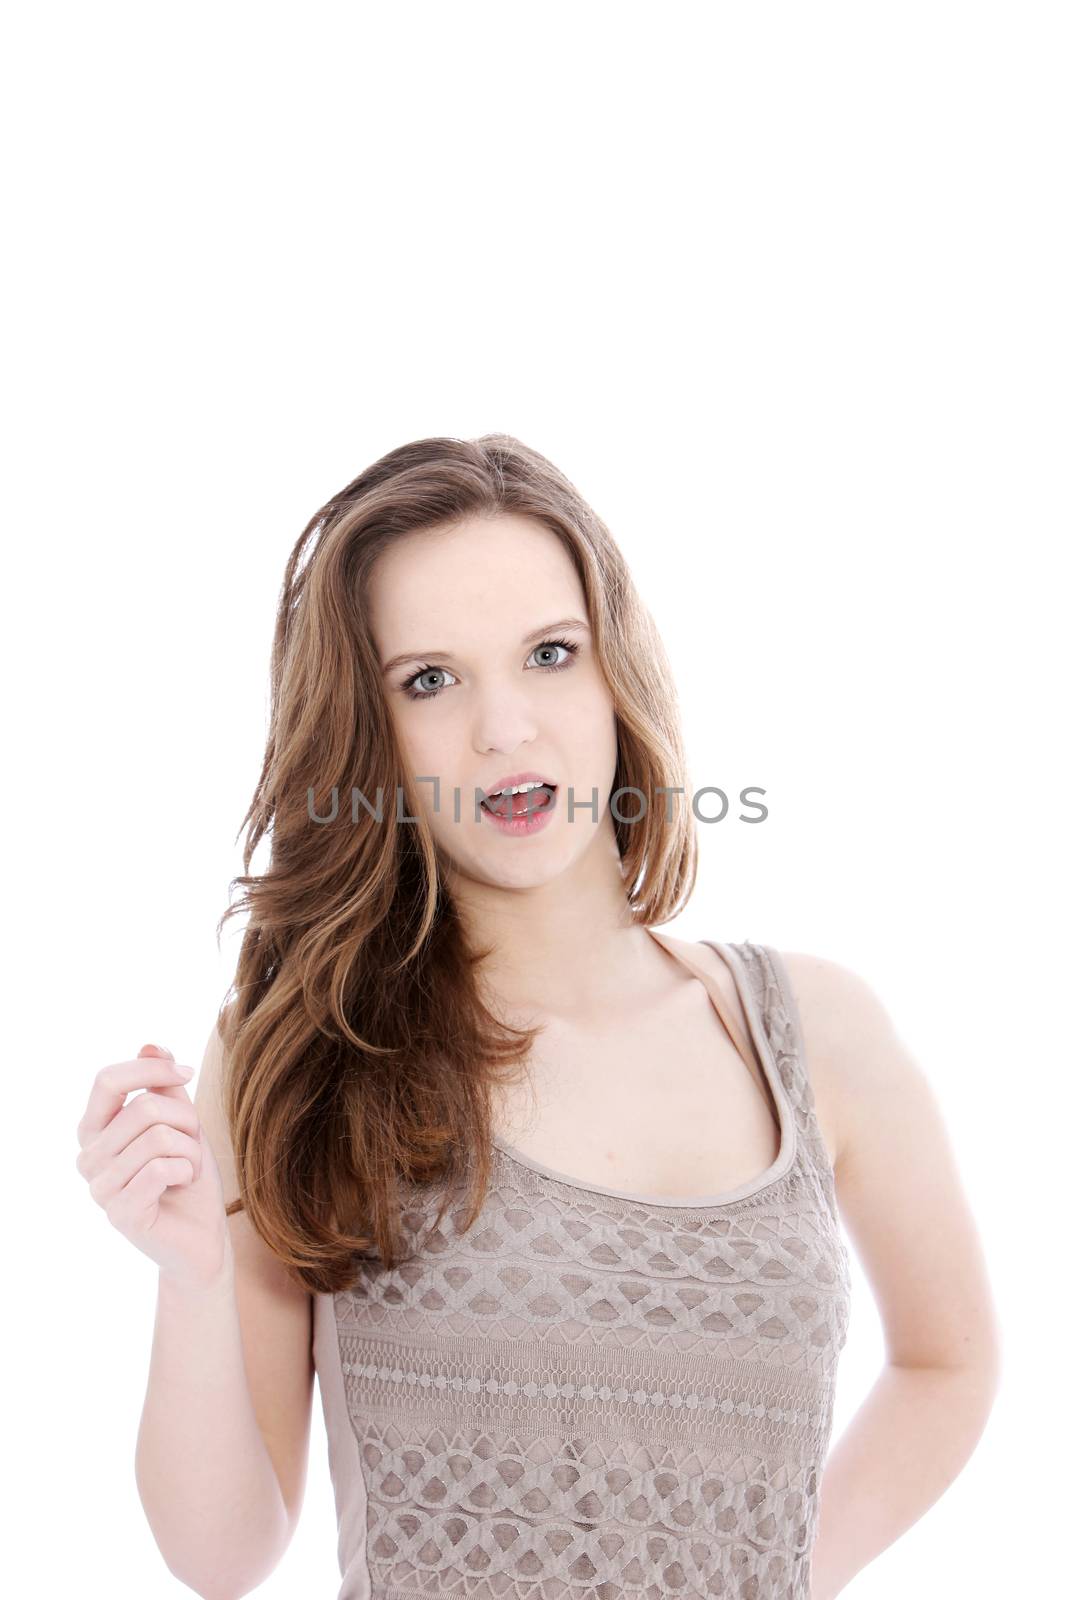 Attractive young woman standing clicking her fingers looking at the camera with her mouth open isolated on white